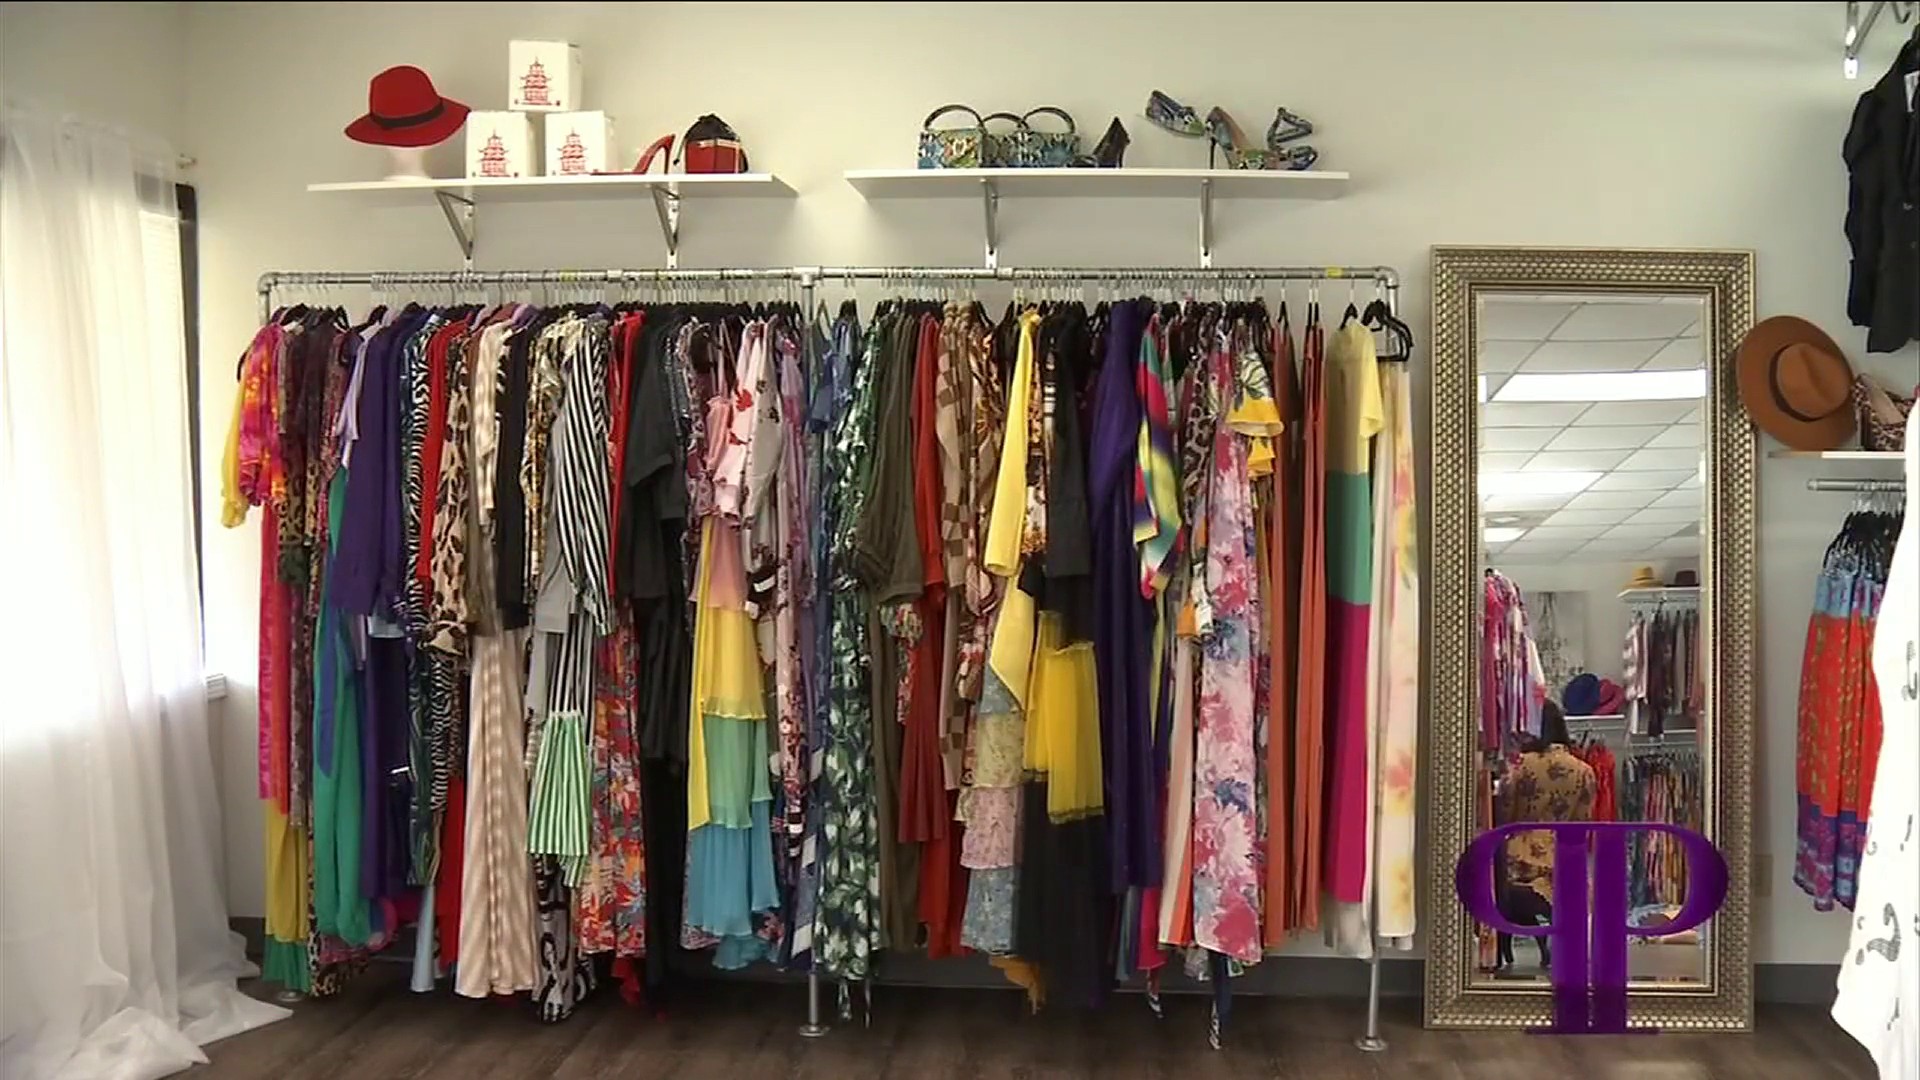 Pretty boutique wants to let you in on Jacksonville's best-kept